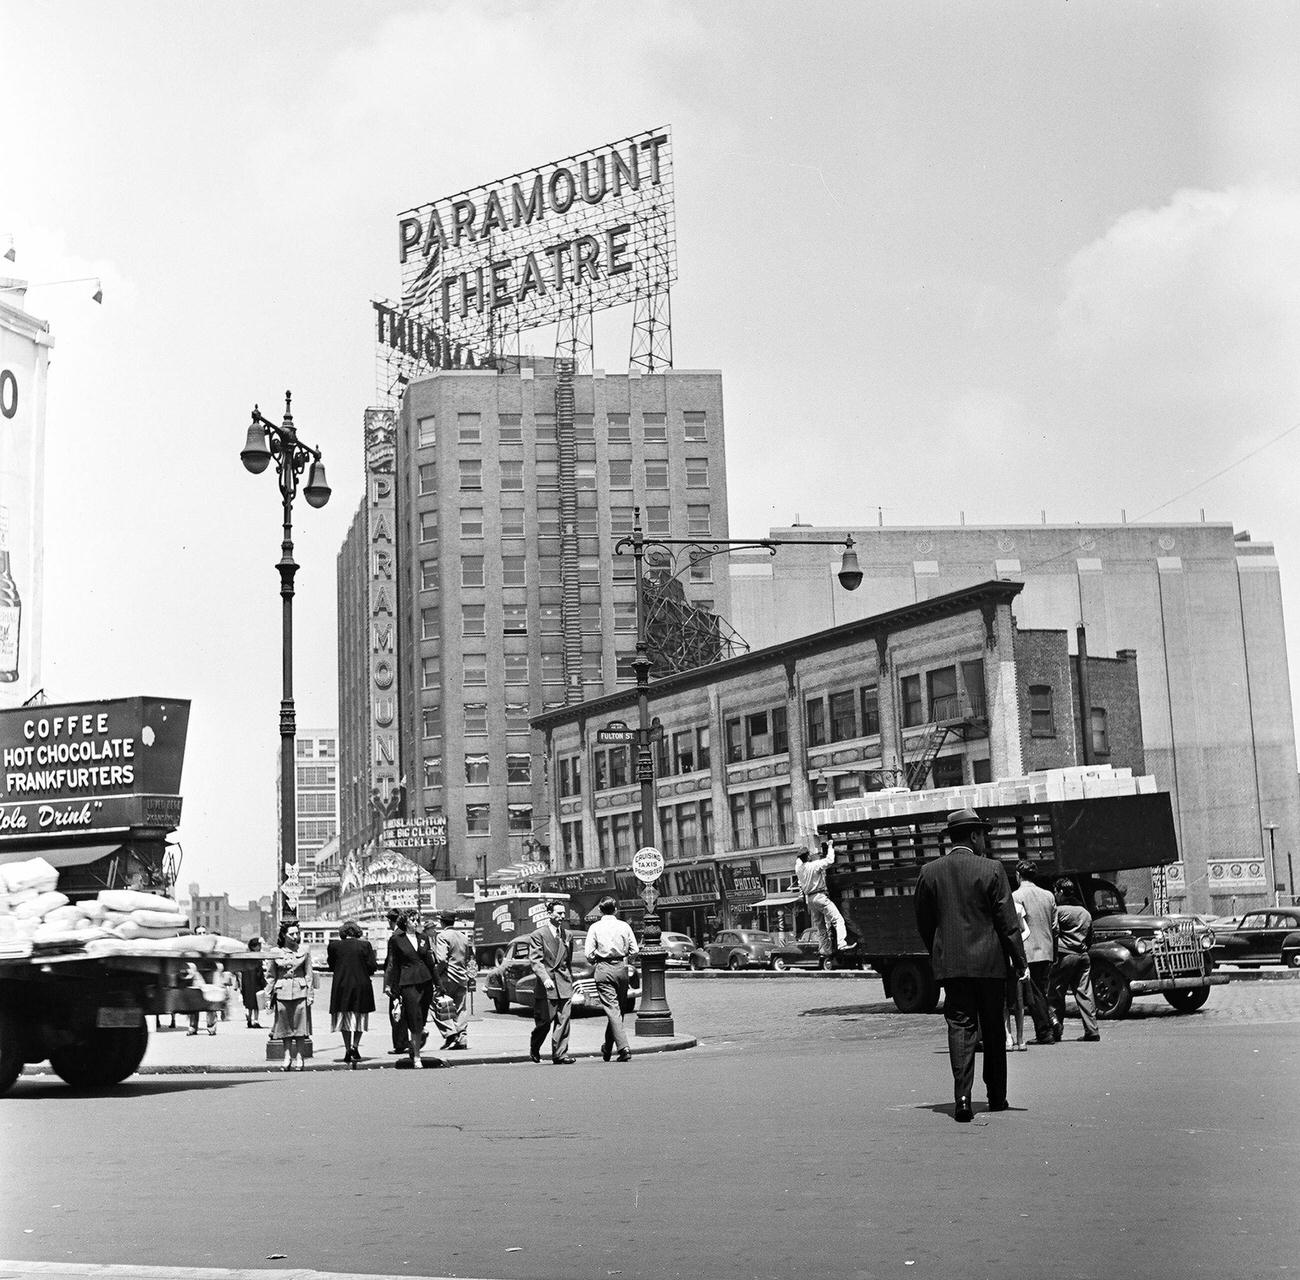 Looking North Across The Intersection Of Fulton Street And Flatbush Avenue, Towards The Paramount Theatre, Brooklyn, 1948